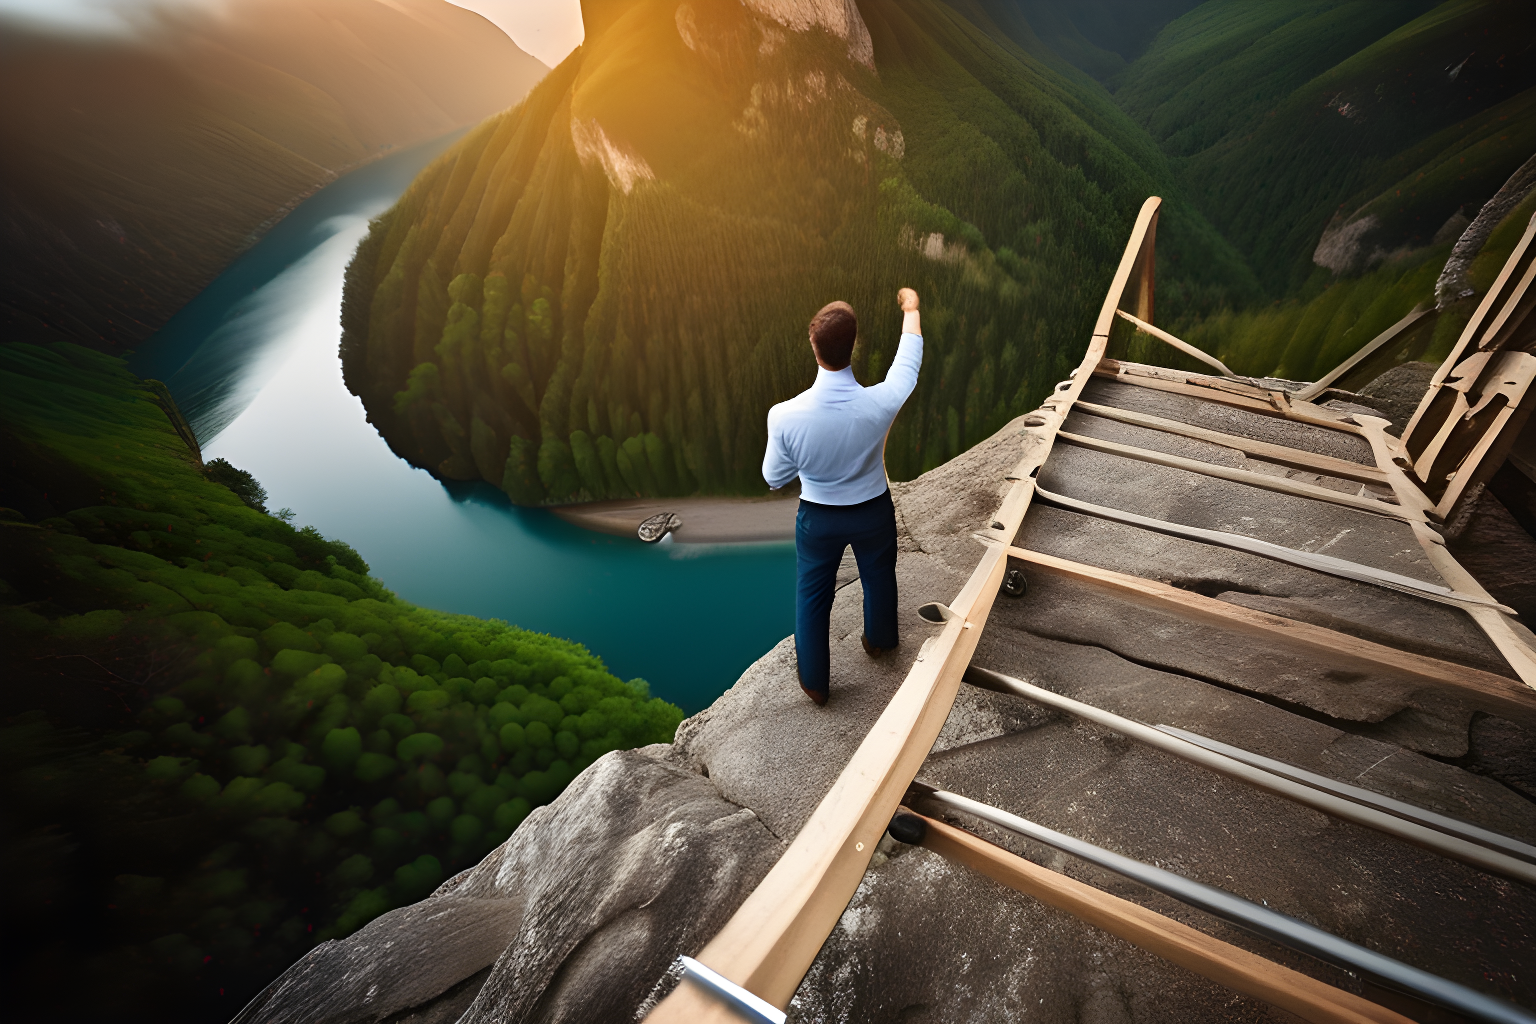 Breathtaking photograph of a man standing near the edge of a cliff and forcefully throwing a ladder off the precipice. award-winning, professional, highly detailed.